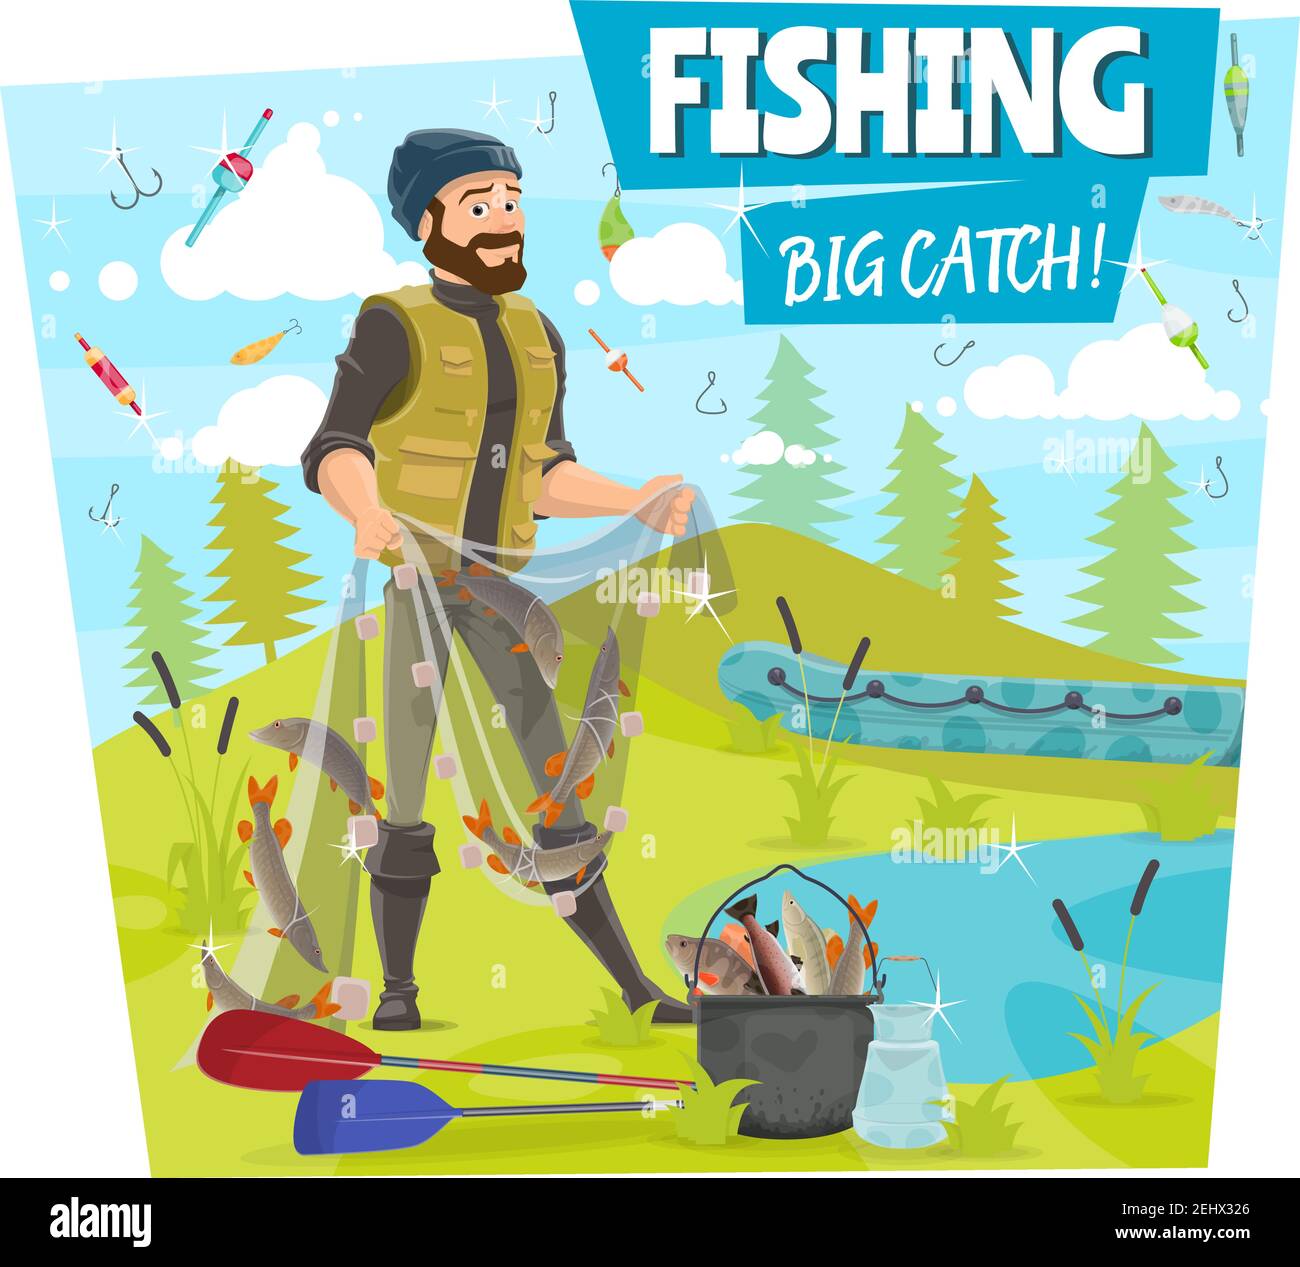 Fishing big catch poster of fisher man with fish in net. Vector